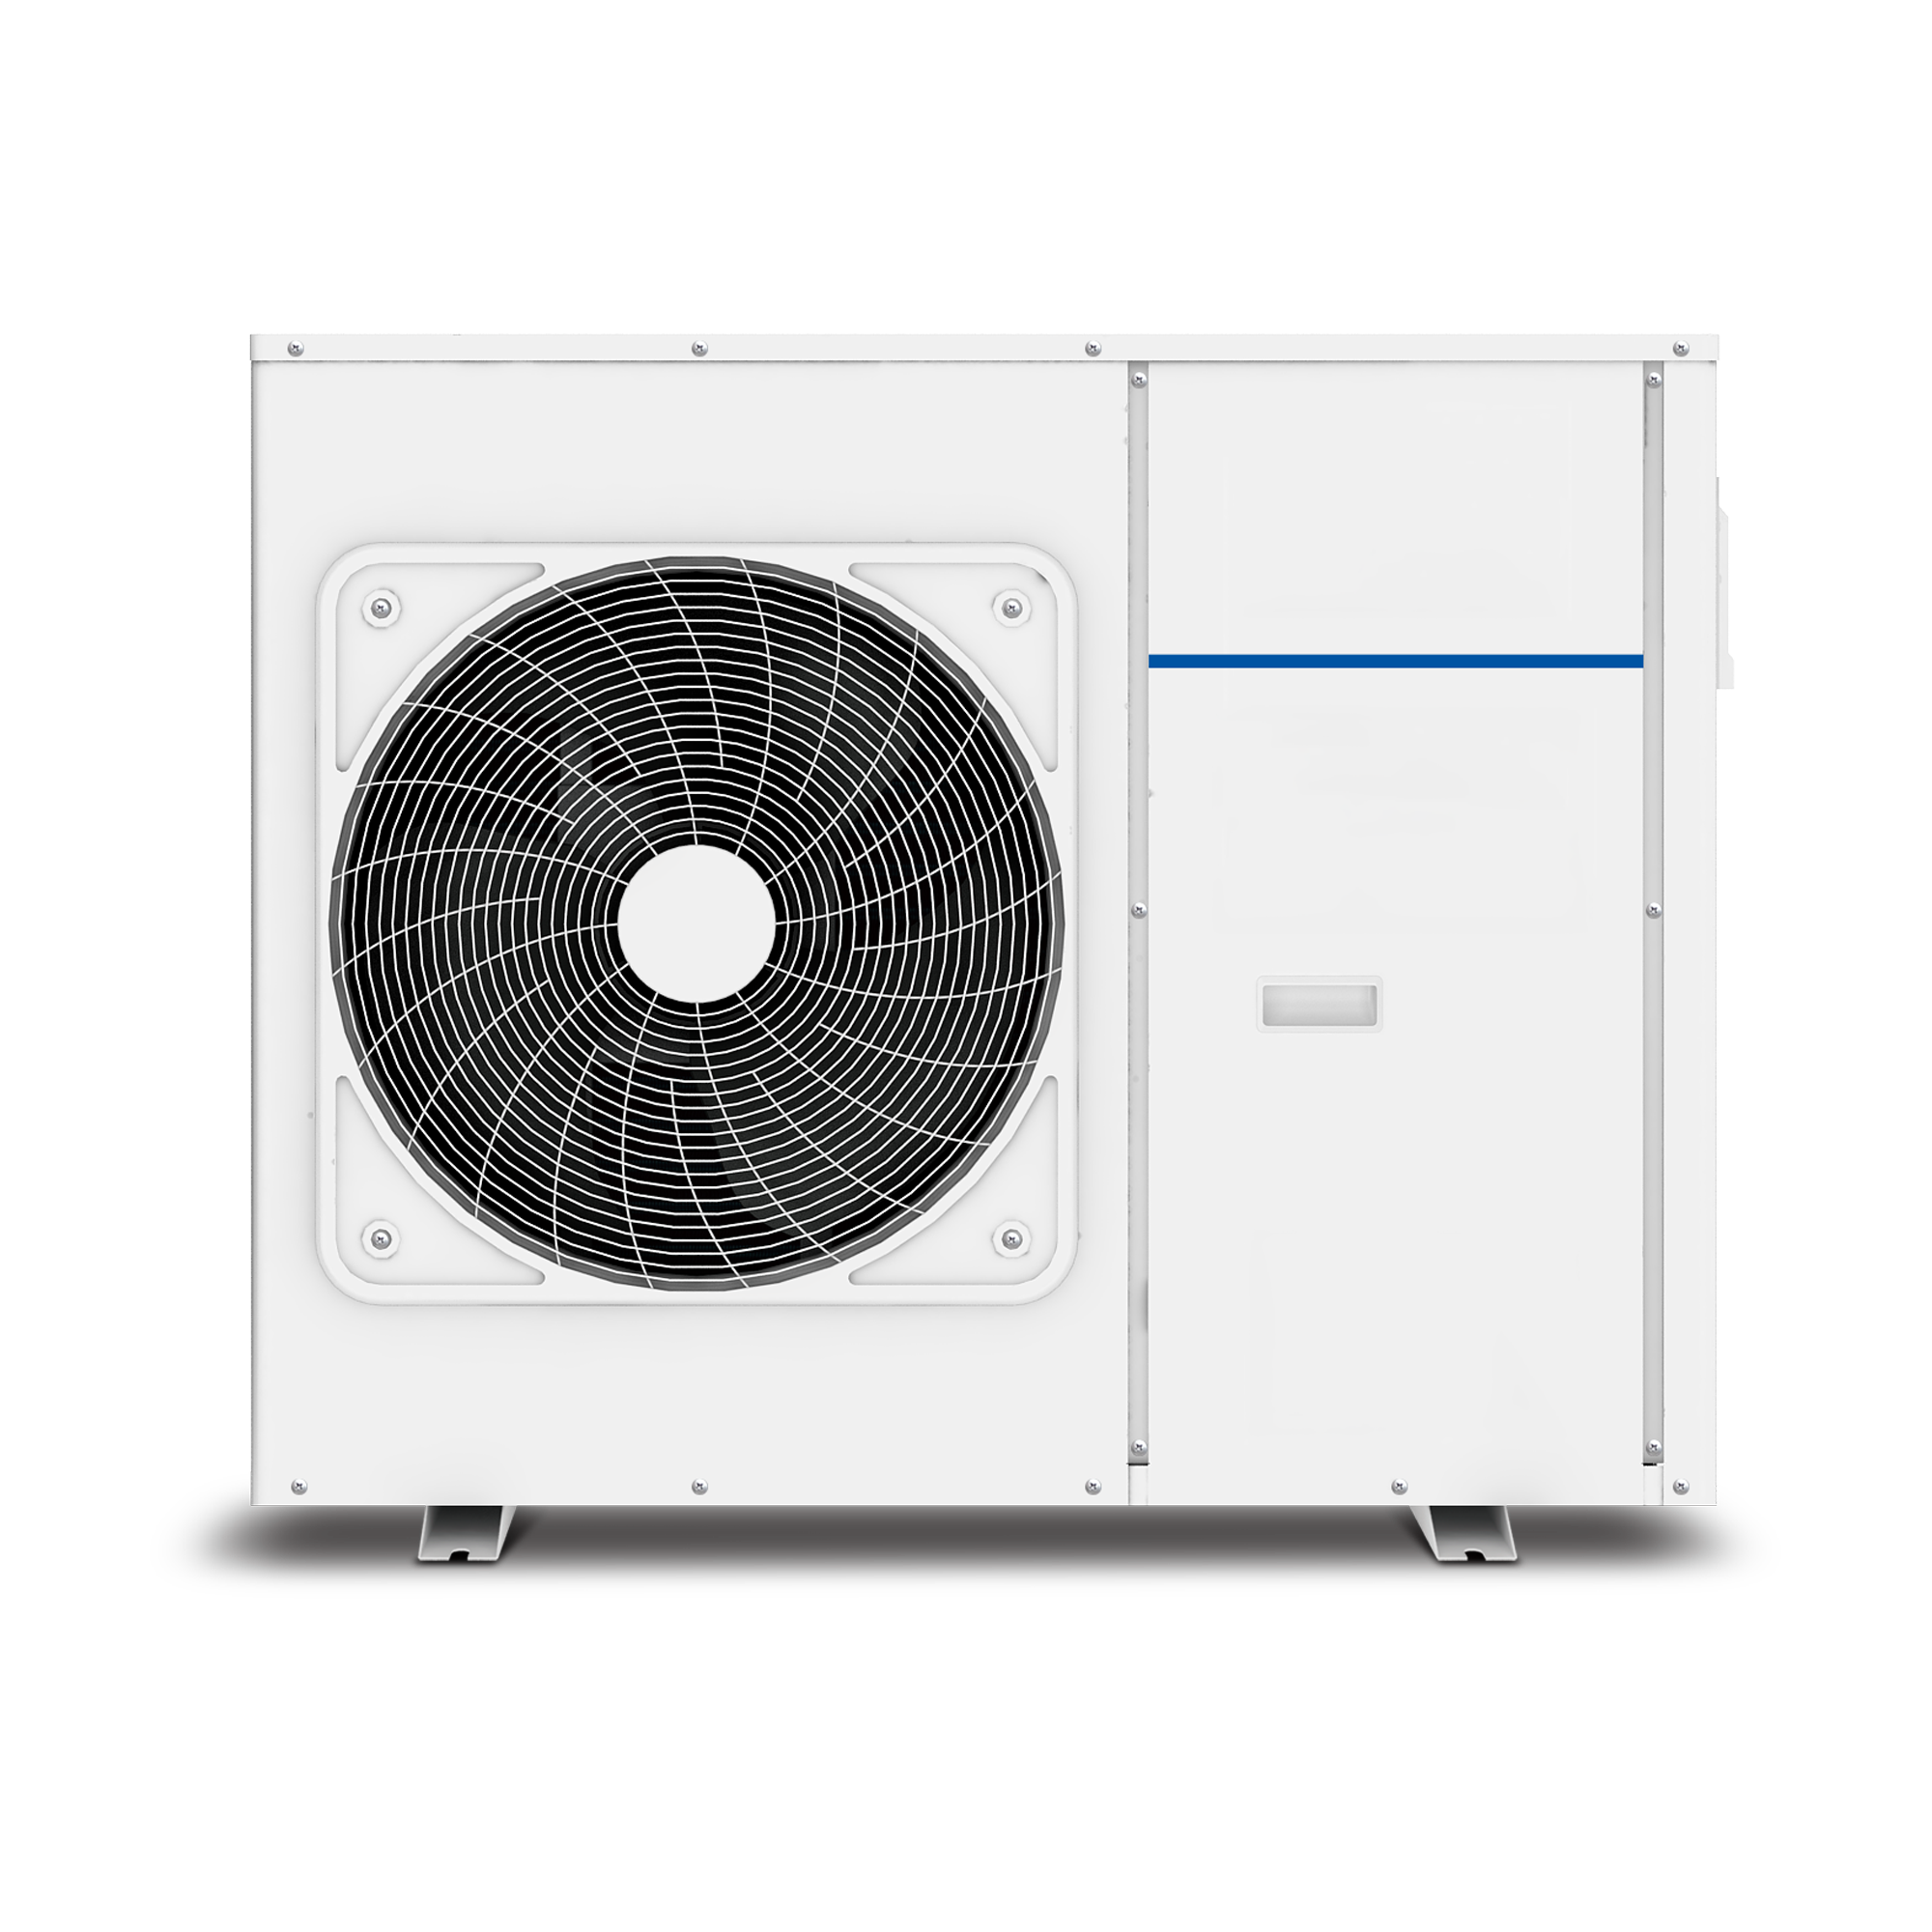 Monoblock Wifi Heating And Cooling Heat Pump For Houses